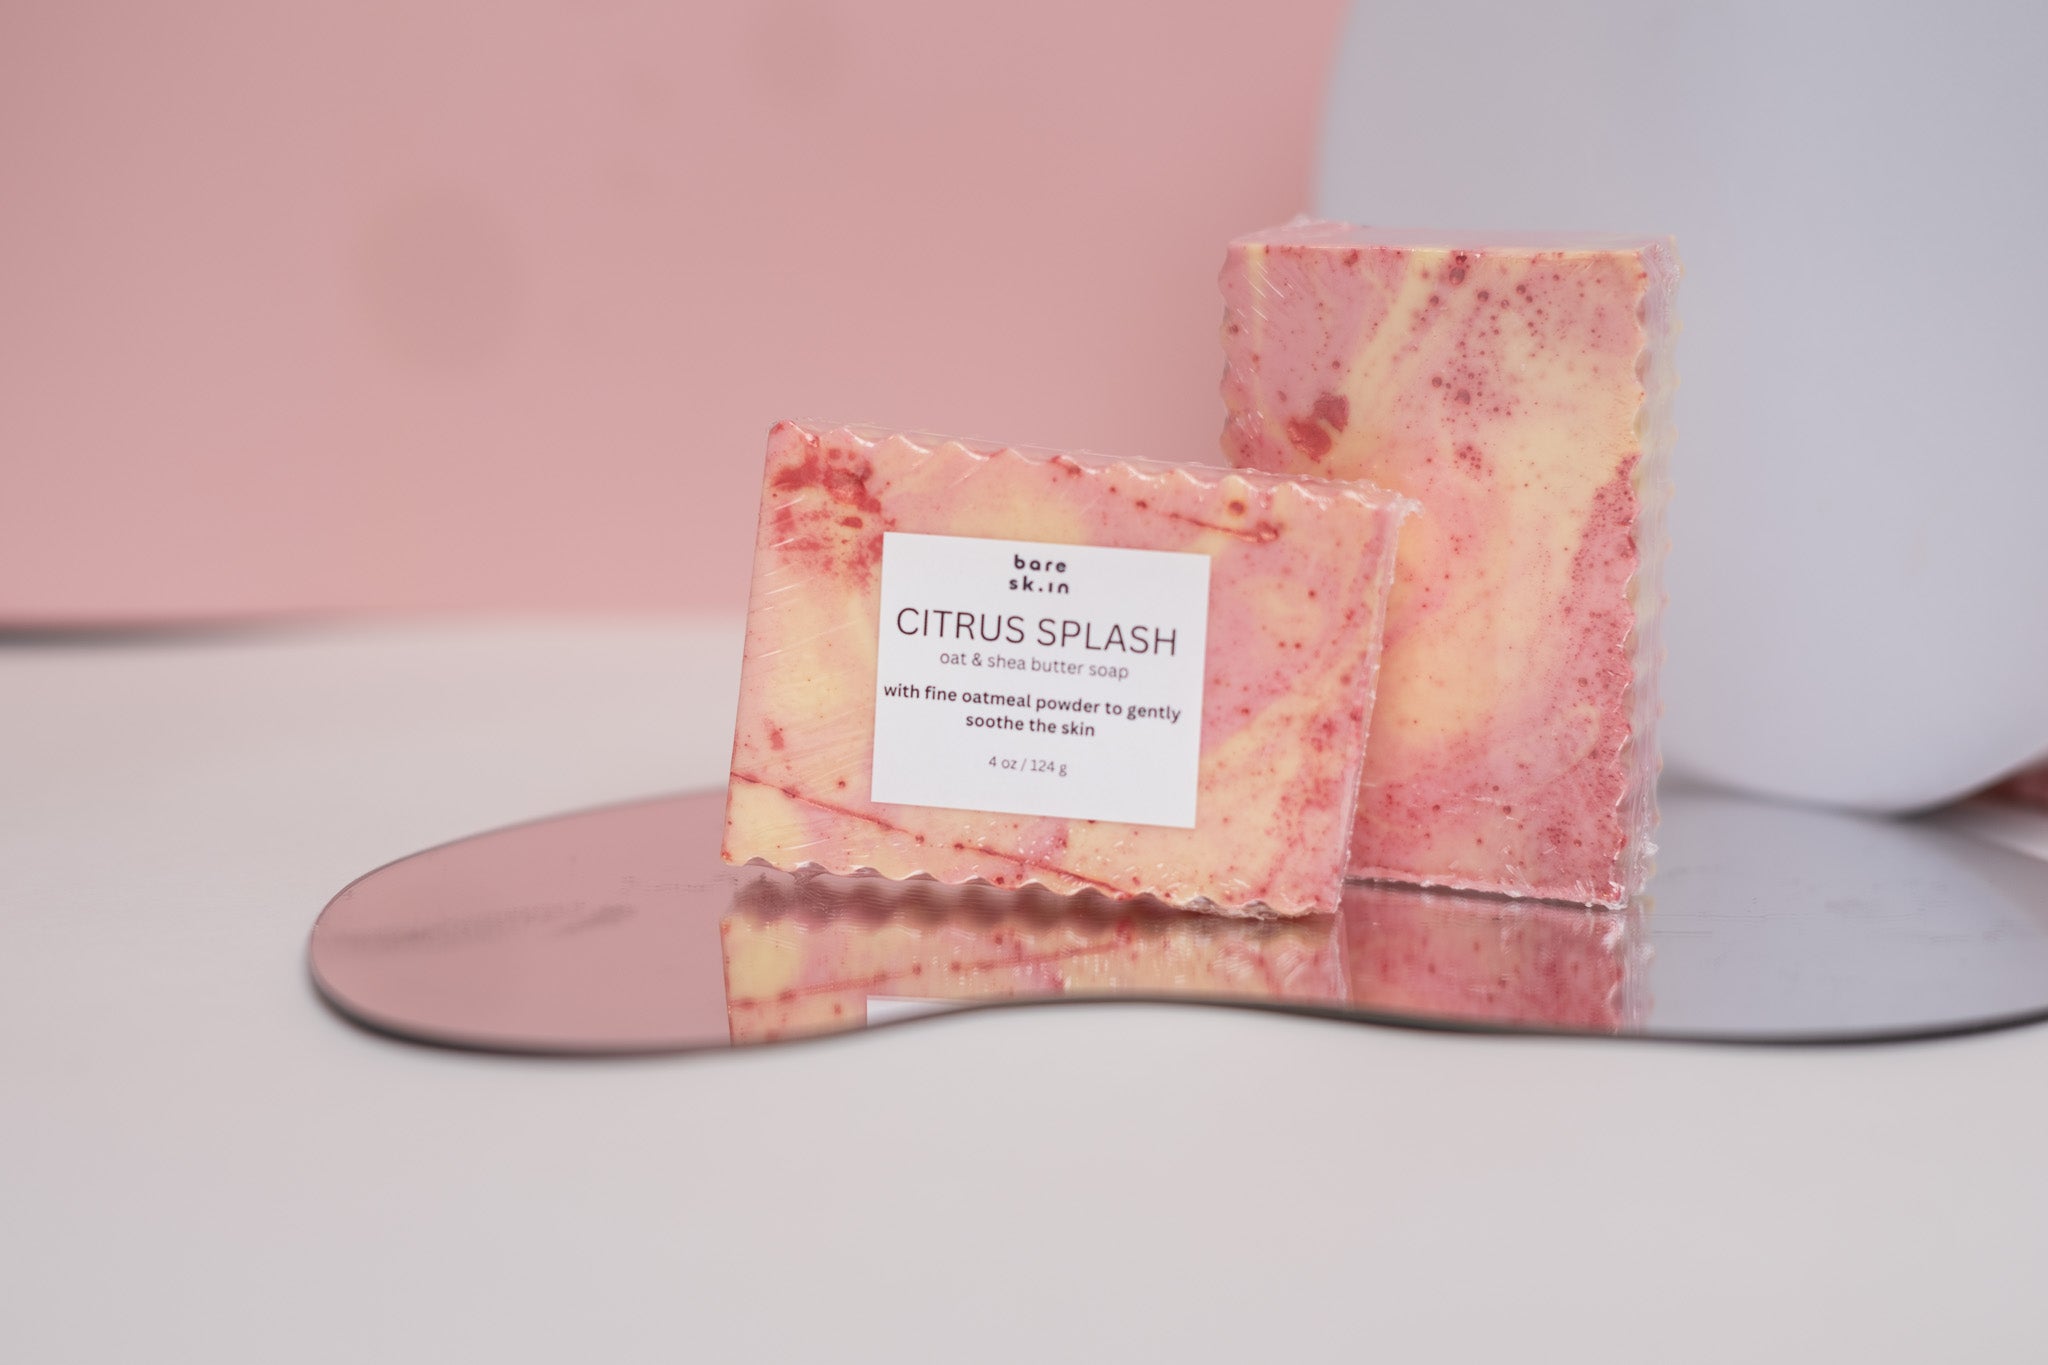 Oat and Shea Body Soap Scented in Citrus Splash